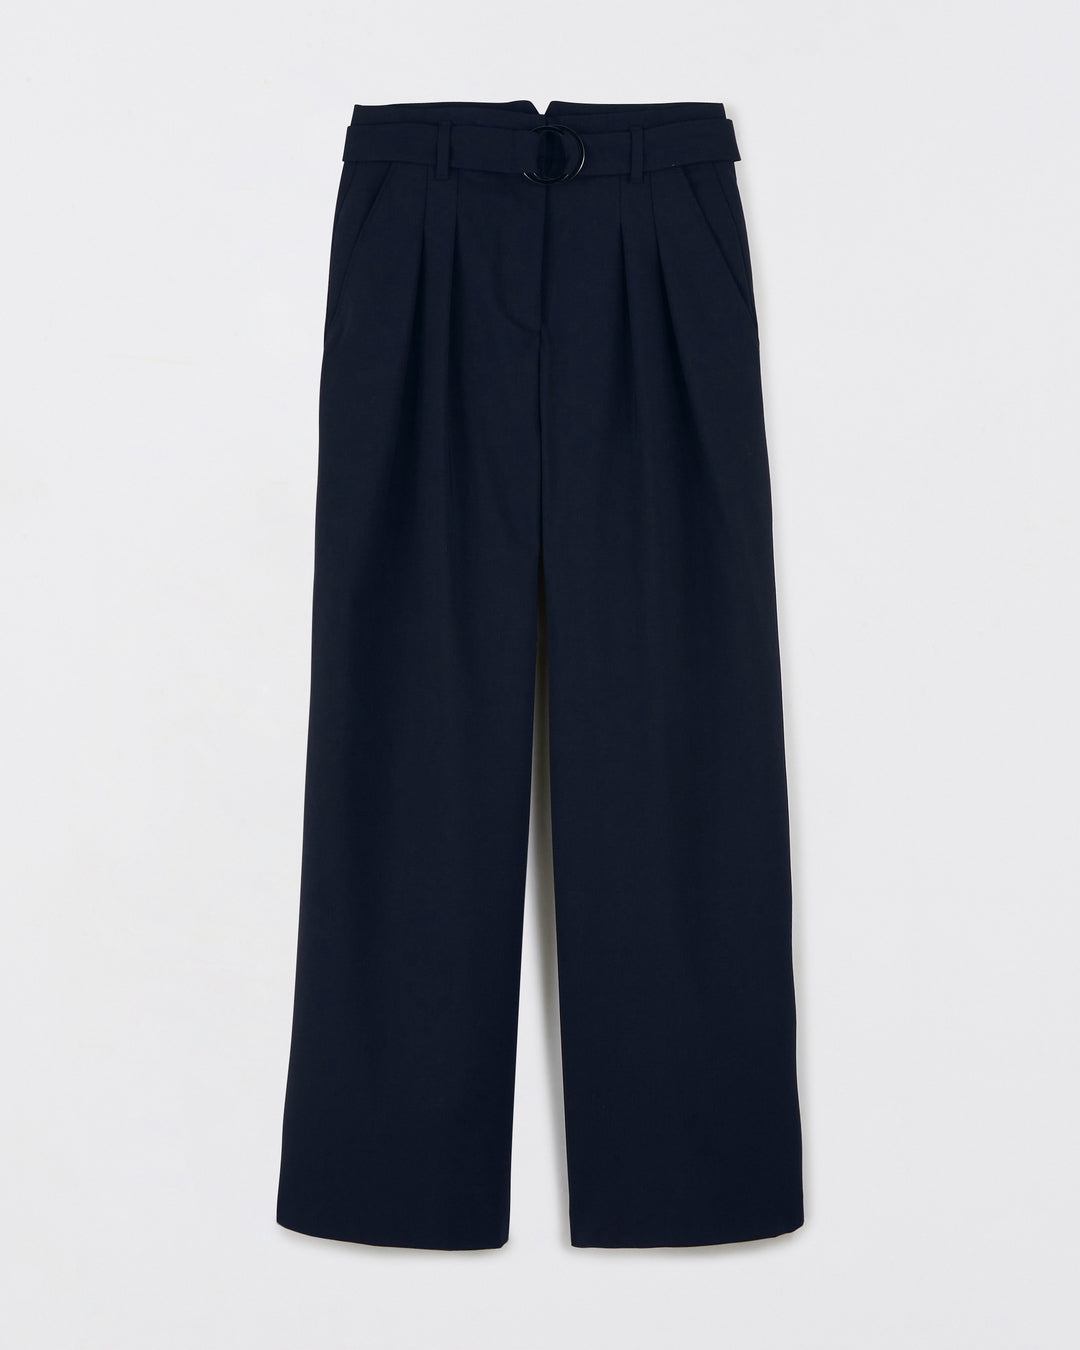 Tailor-pants-navy-blue-Palazzo-cut-High-waist-Details-double-pleated-at-the-waist-Low-leg-XXL-Dessines-the-waist-and-the-legs-Buckle-belt-Removable-buckle-belt-brown-17H10-tailors-for-women-paris-